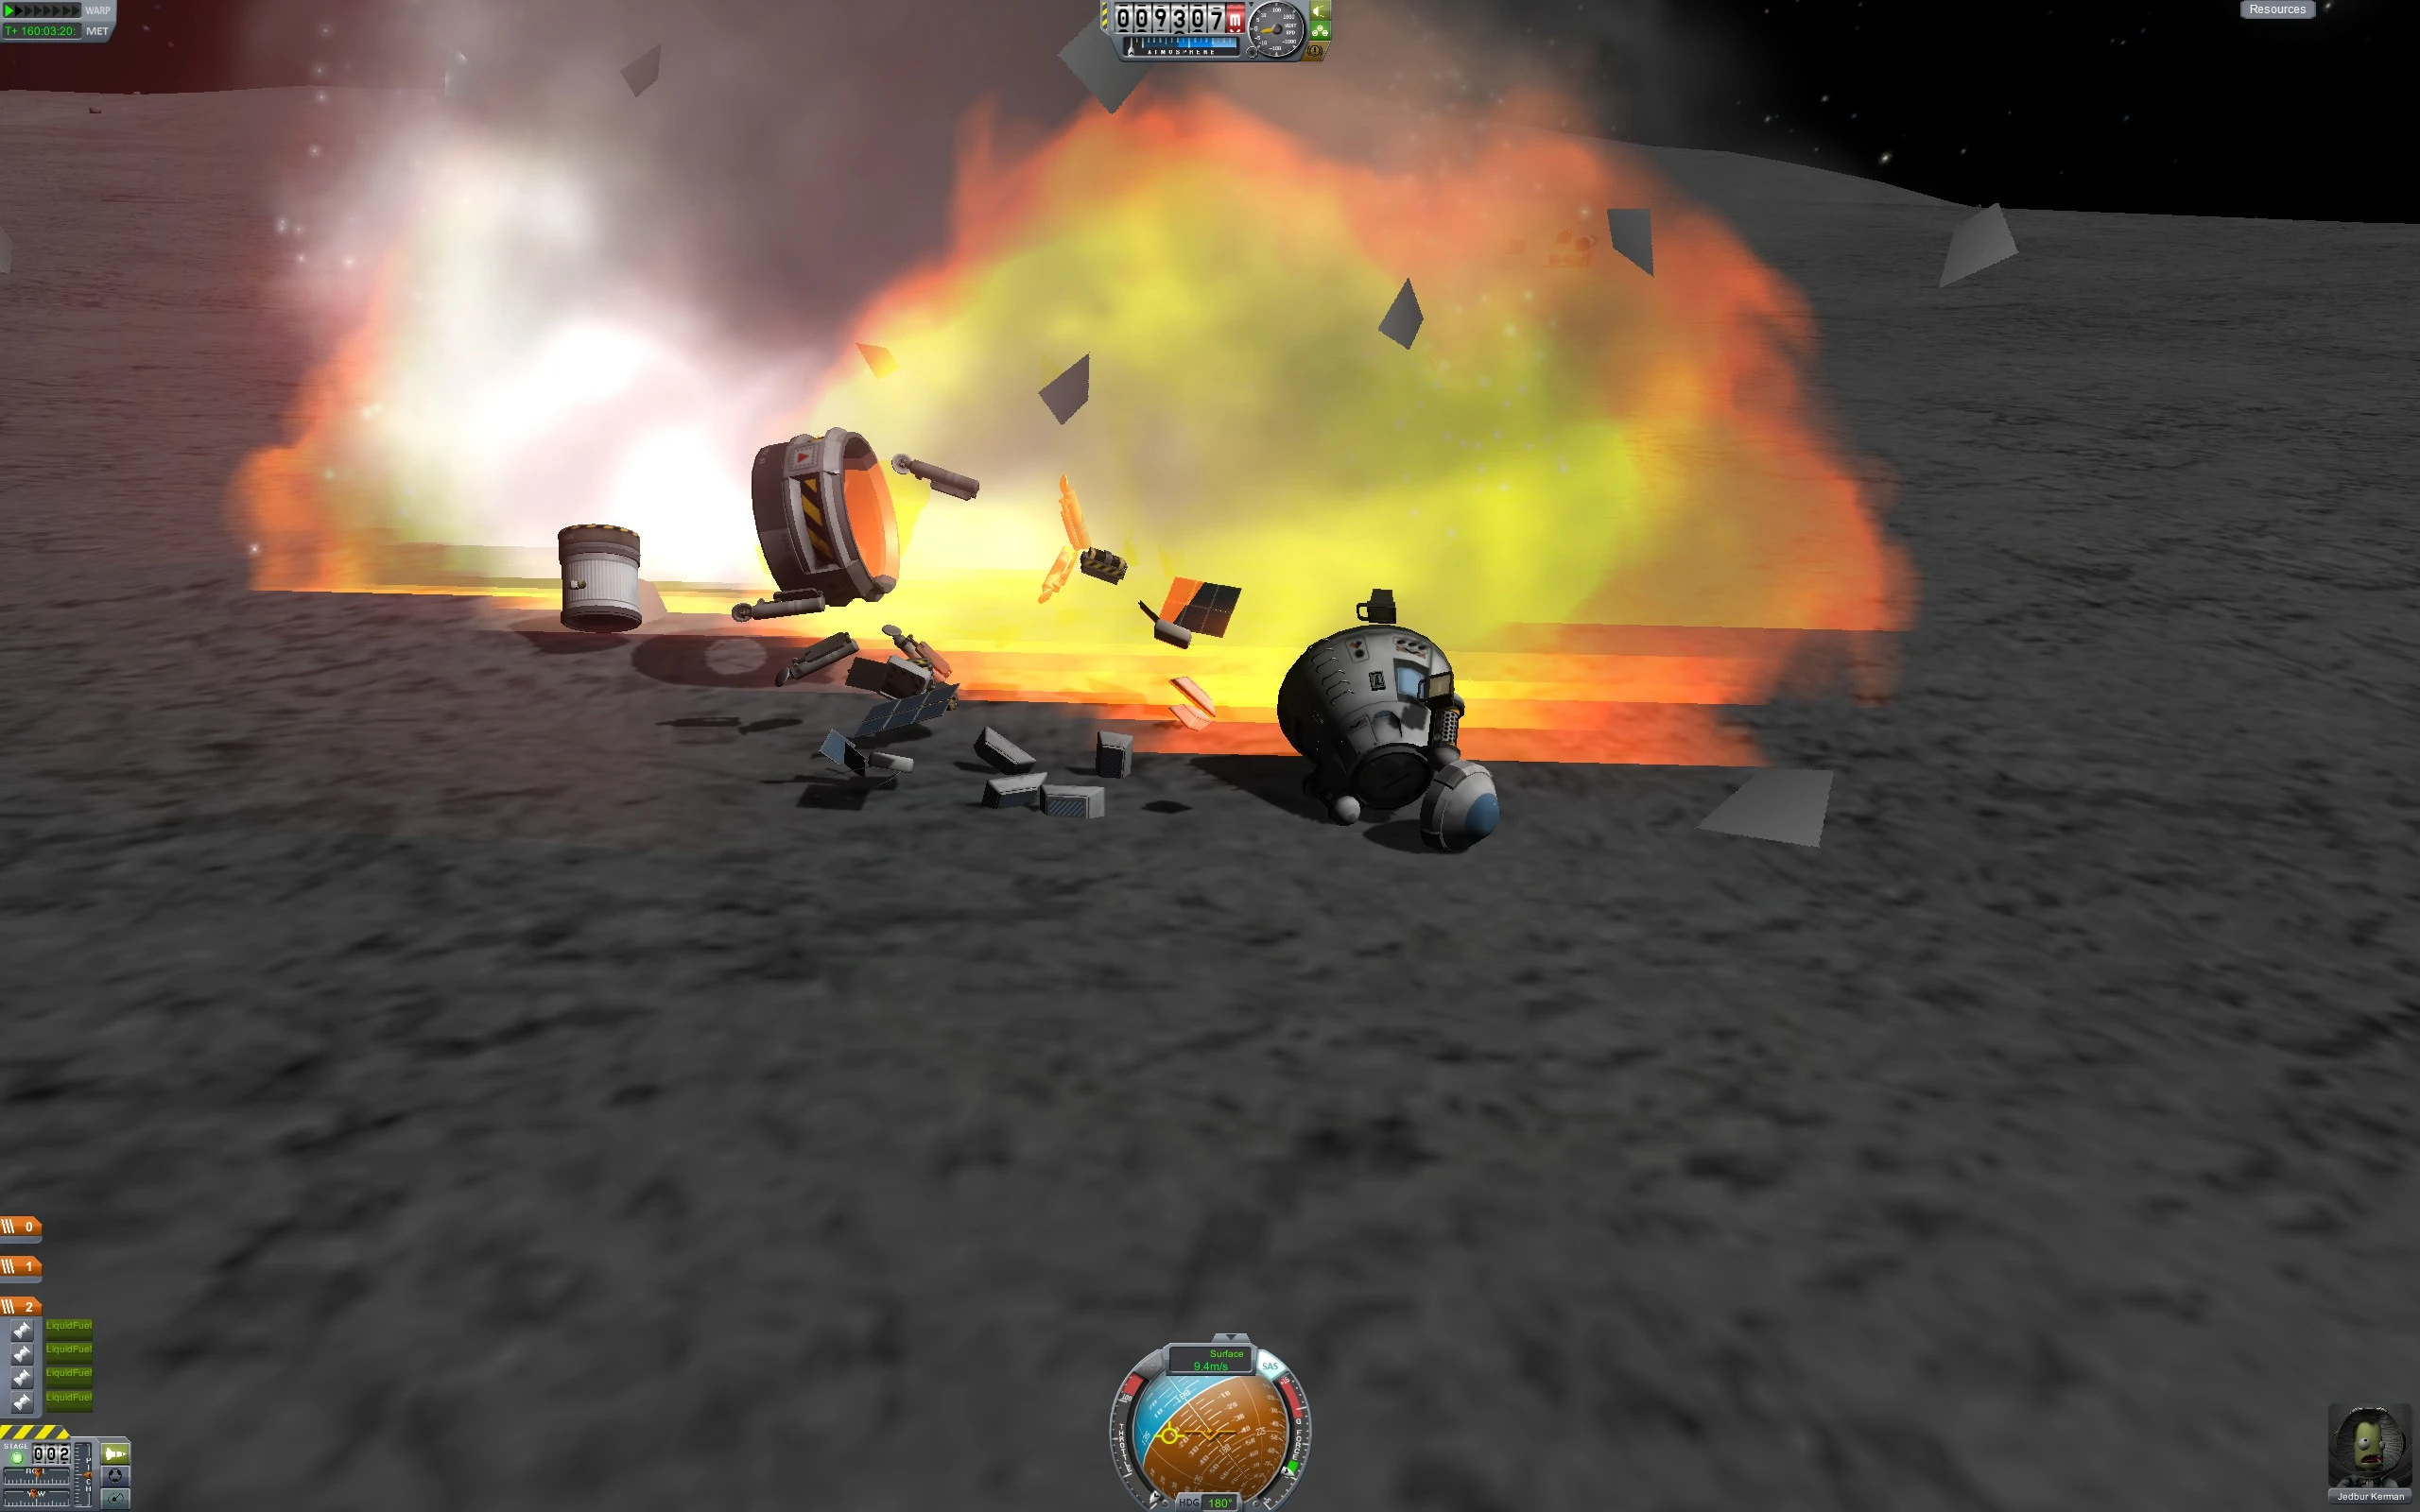 You see this happen an awful lot in KSP